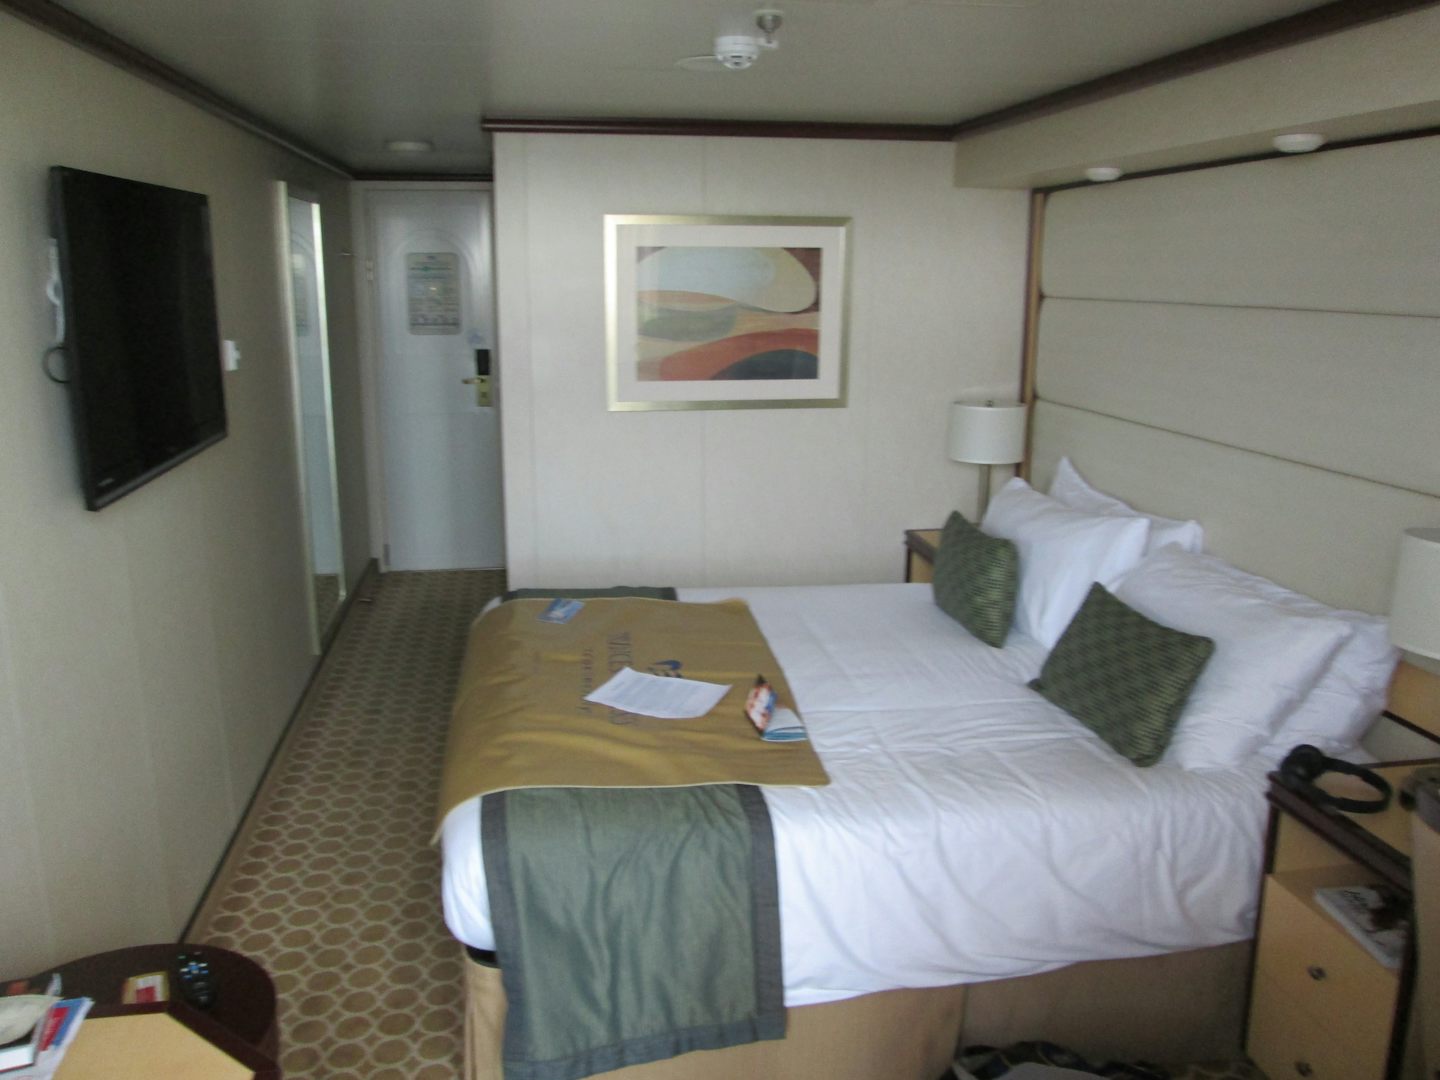 This photo is of our stateroom A505 on the Aloha deck